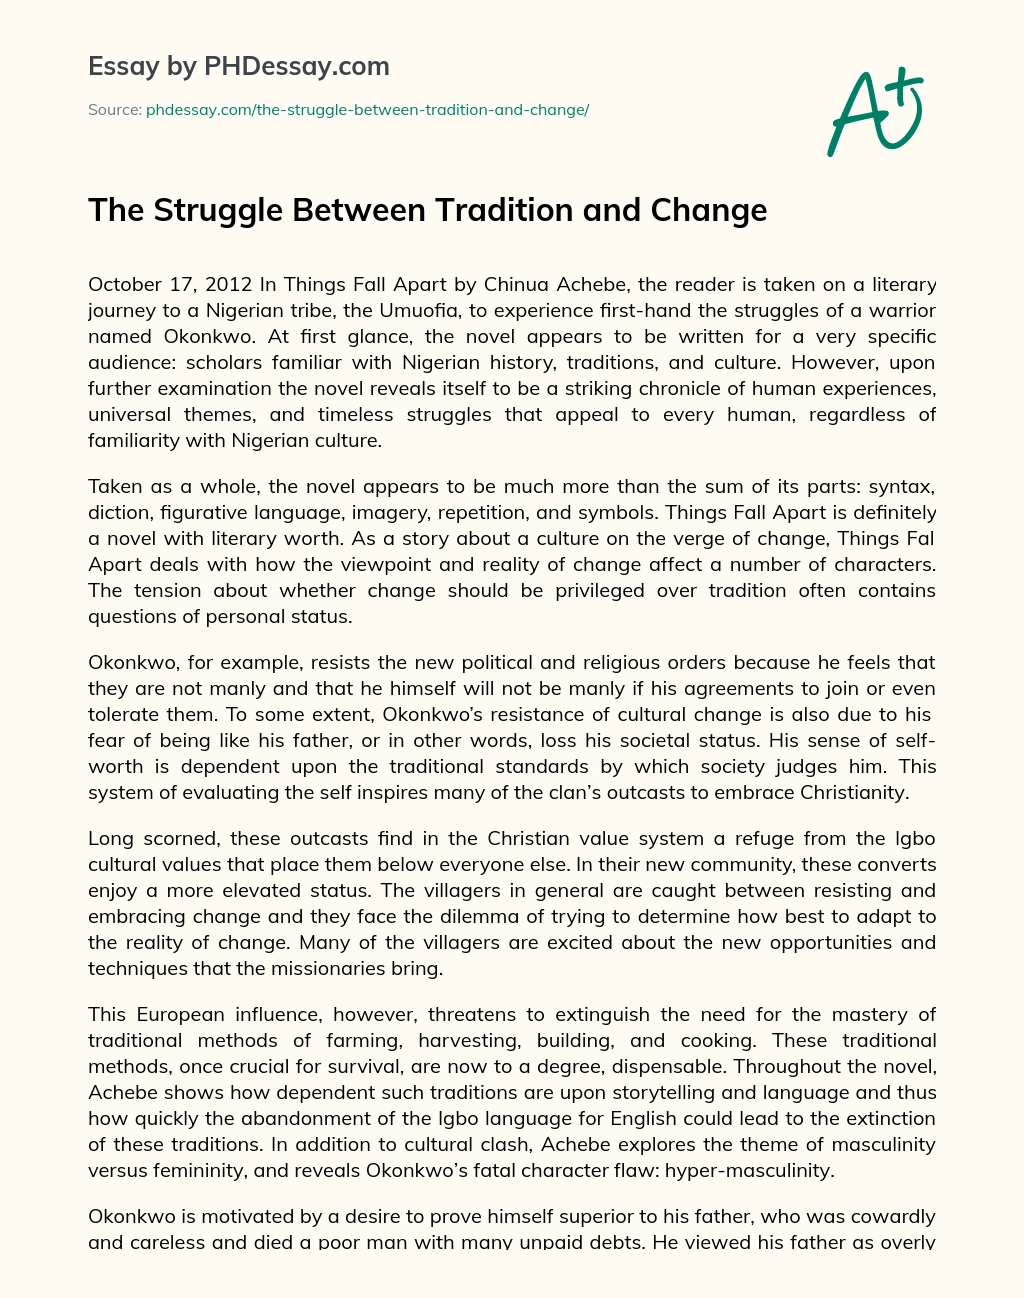 The Struggle Between Tradition and Change essay